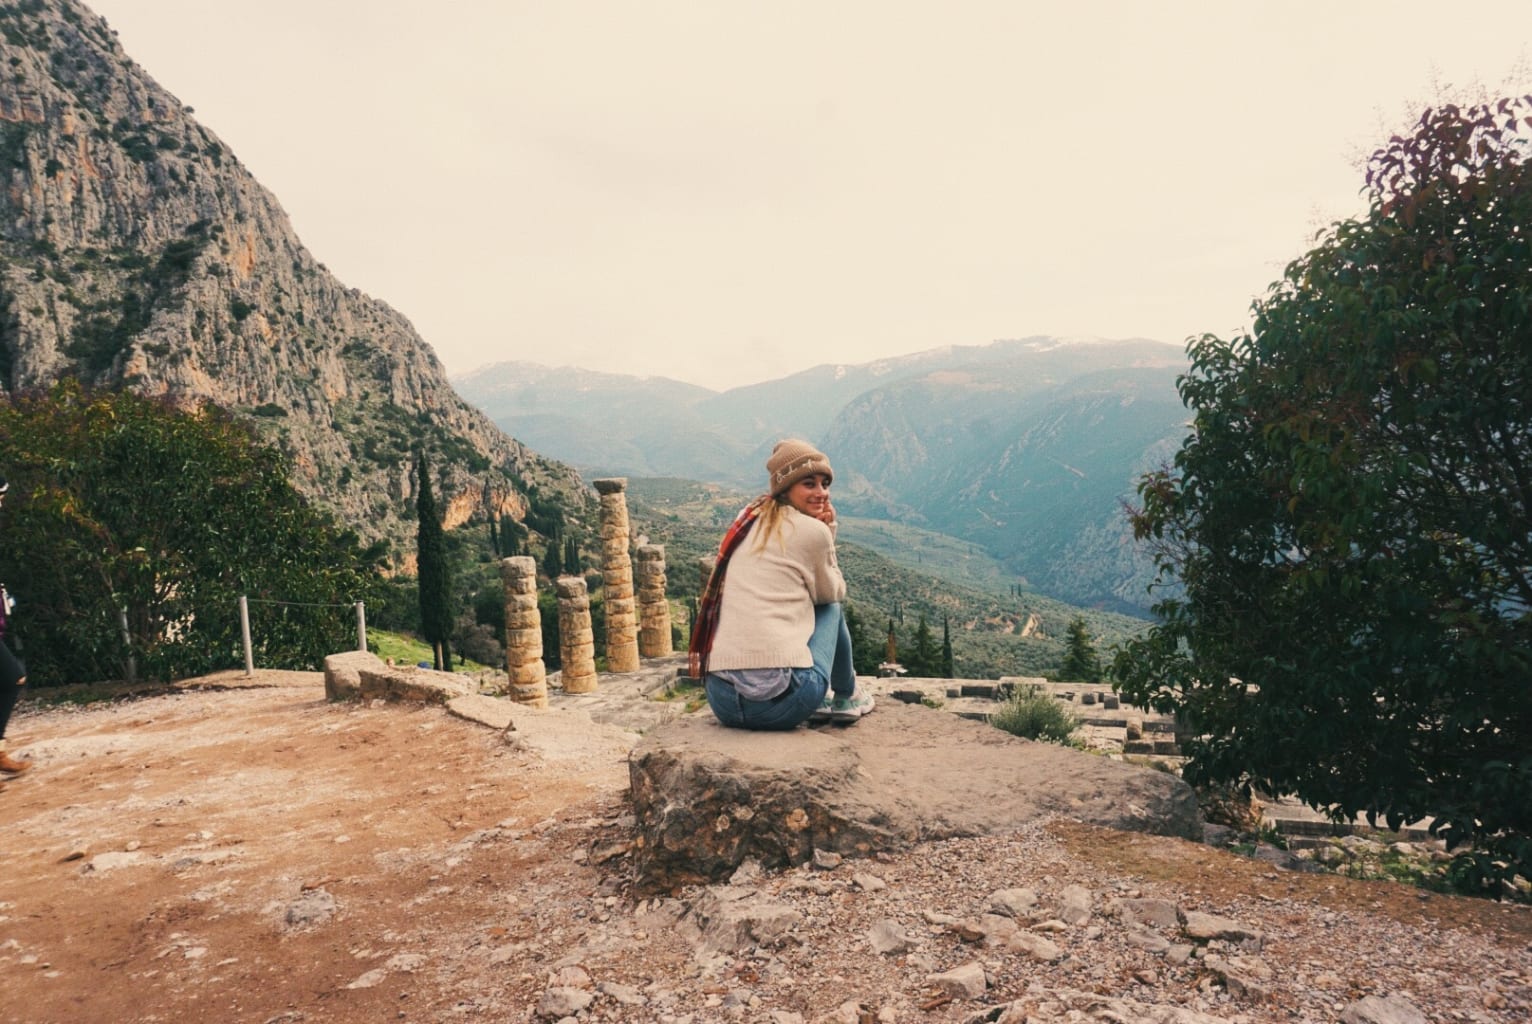 A student sitting on the ground, in front of a mountain view in Athens.